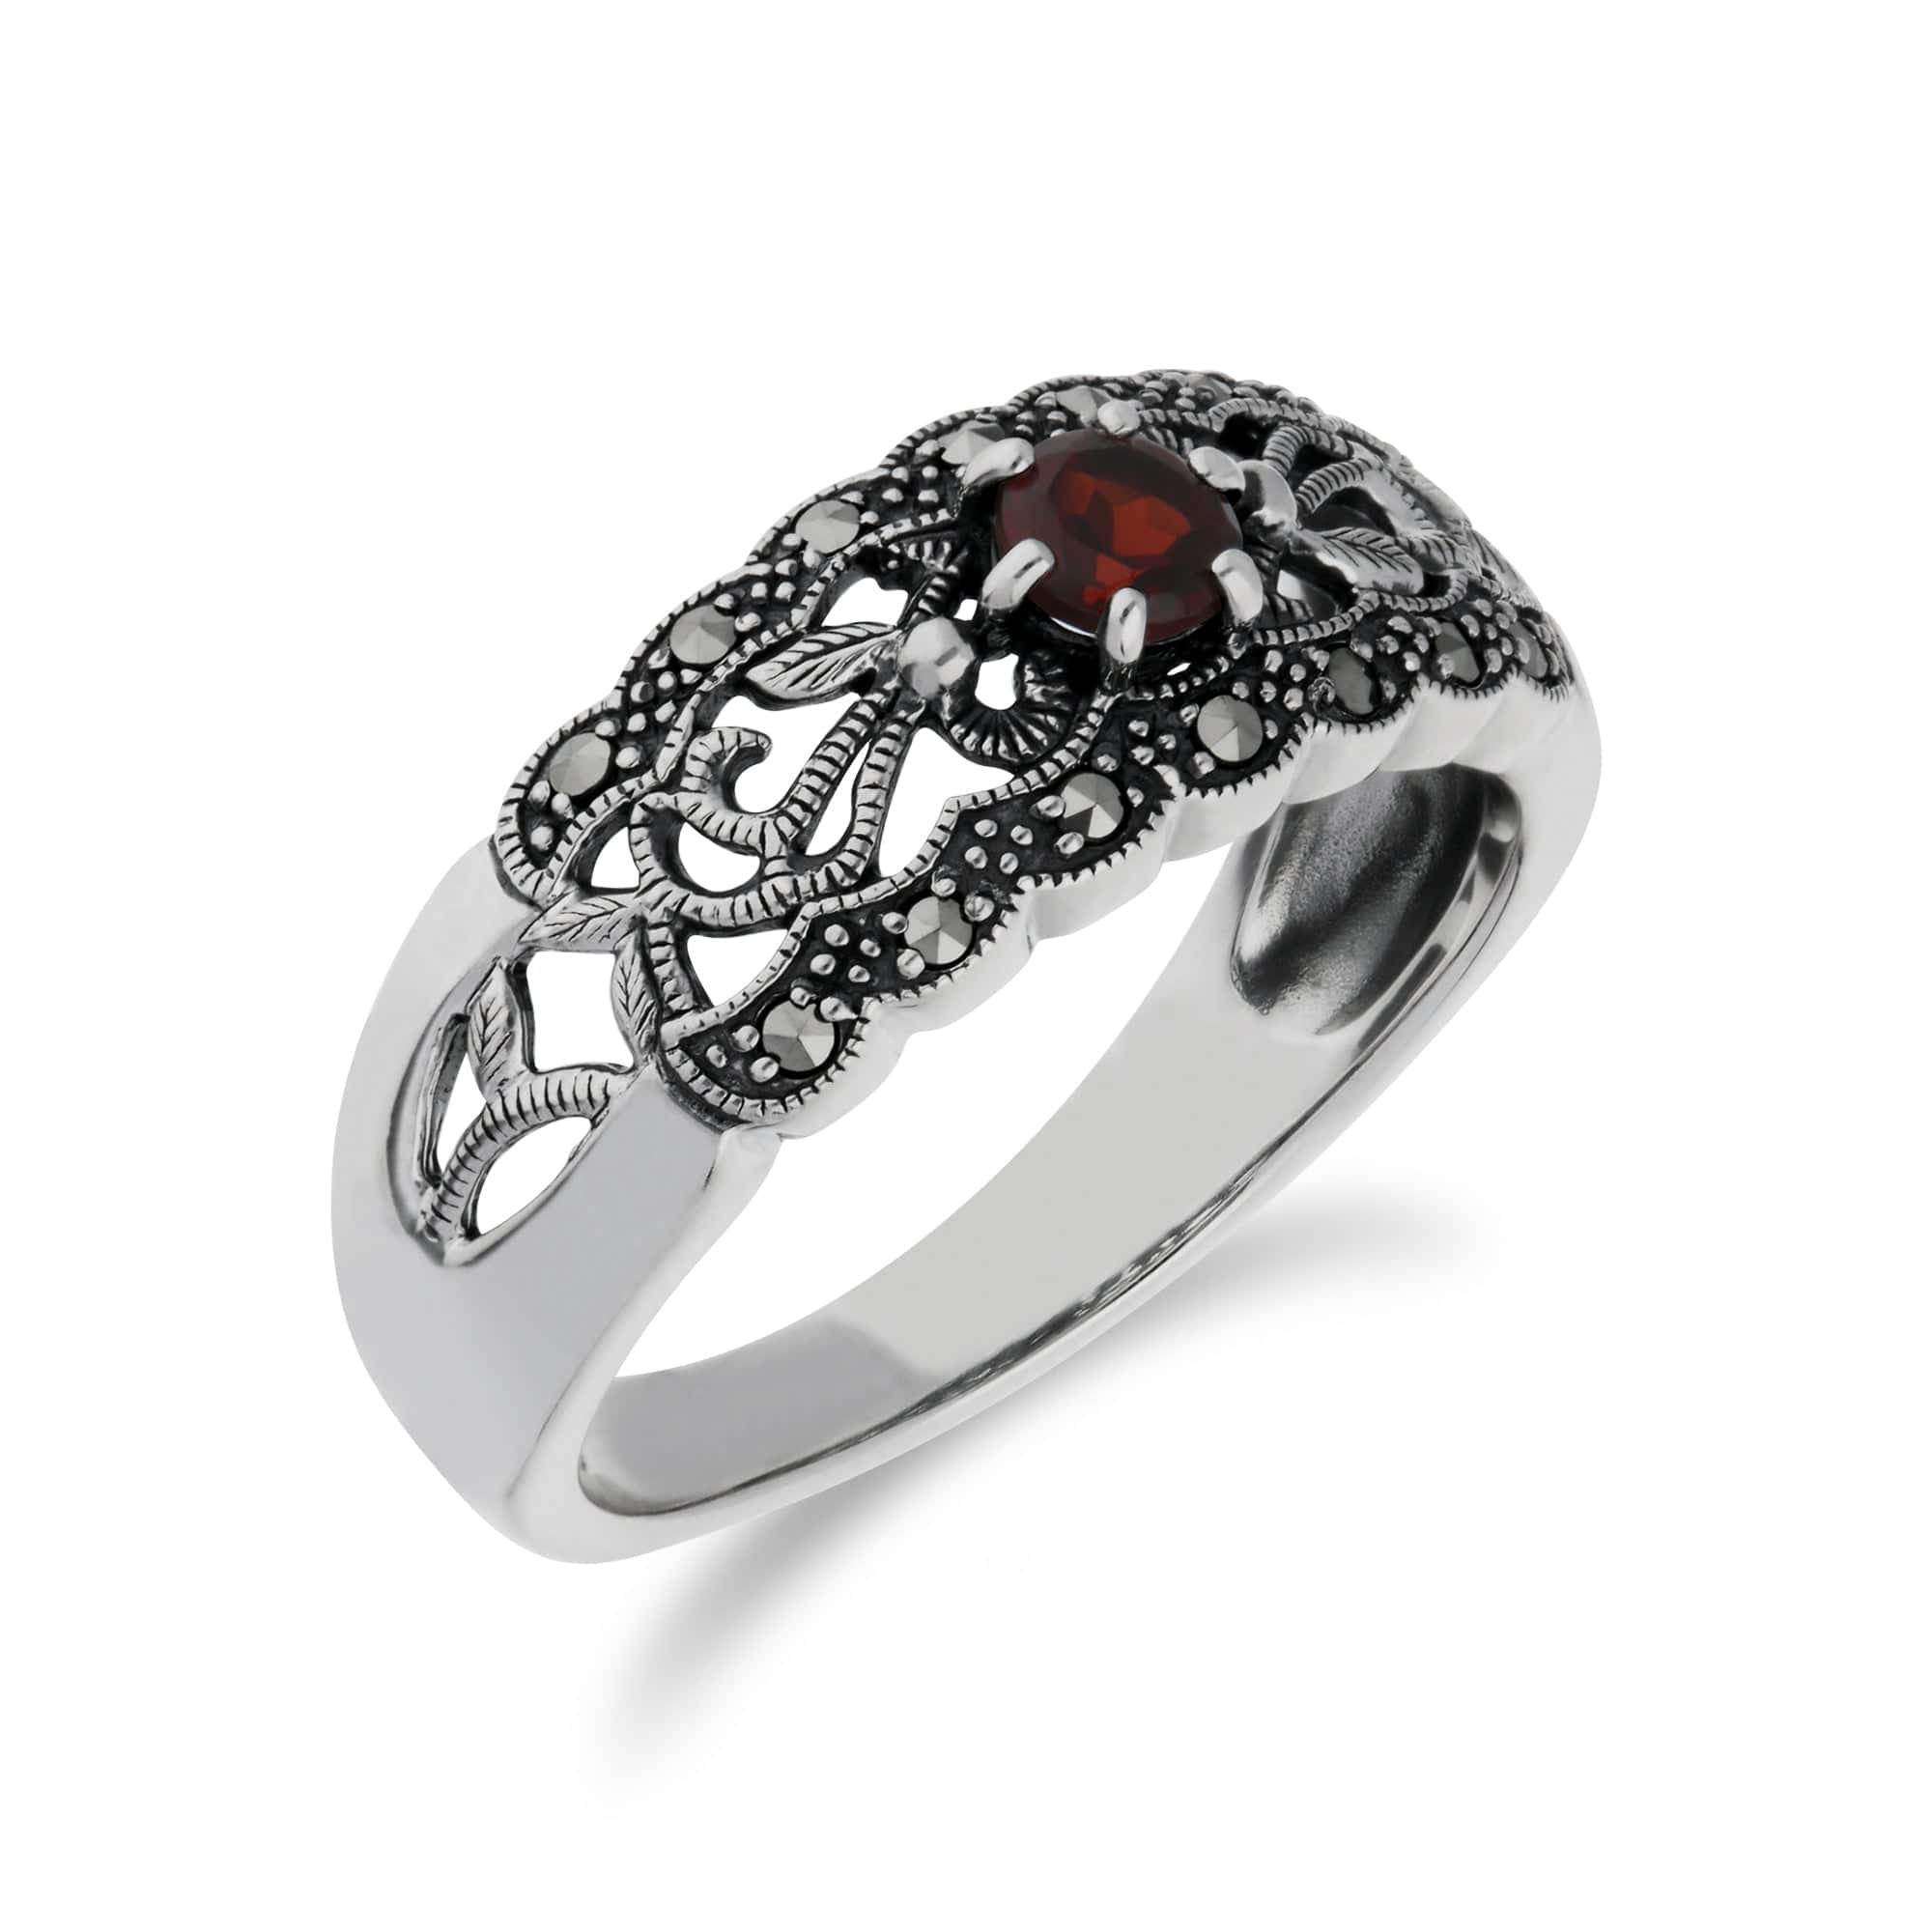 Art Nouveau Style Round Garnet & Marcasite Floral Band Ring in 925 Sterling Silver - Gemondo